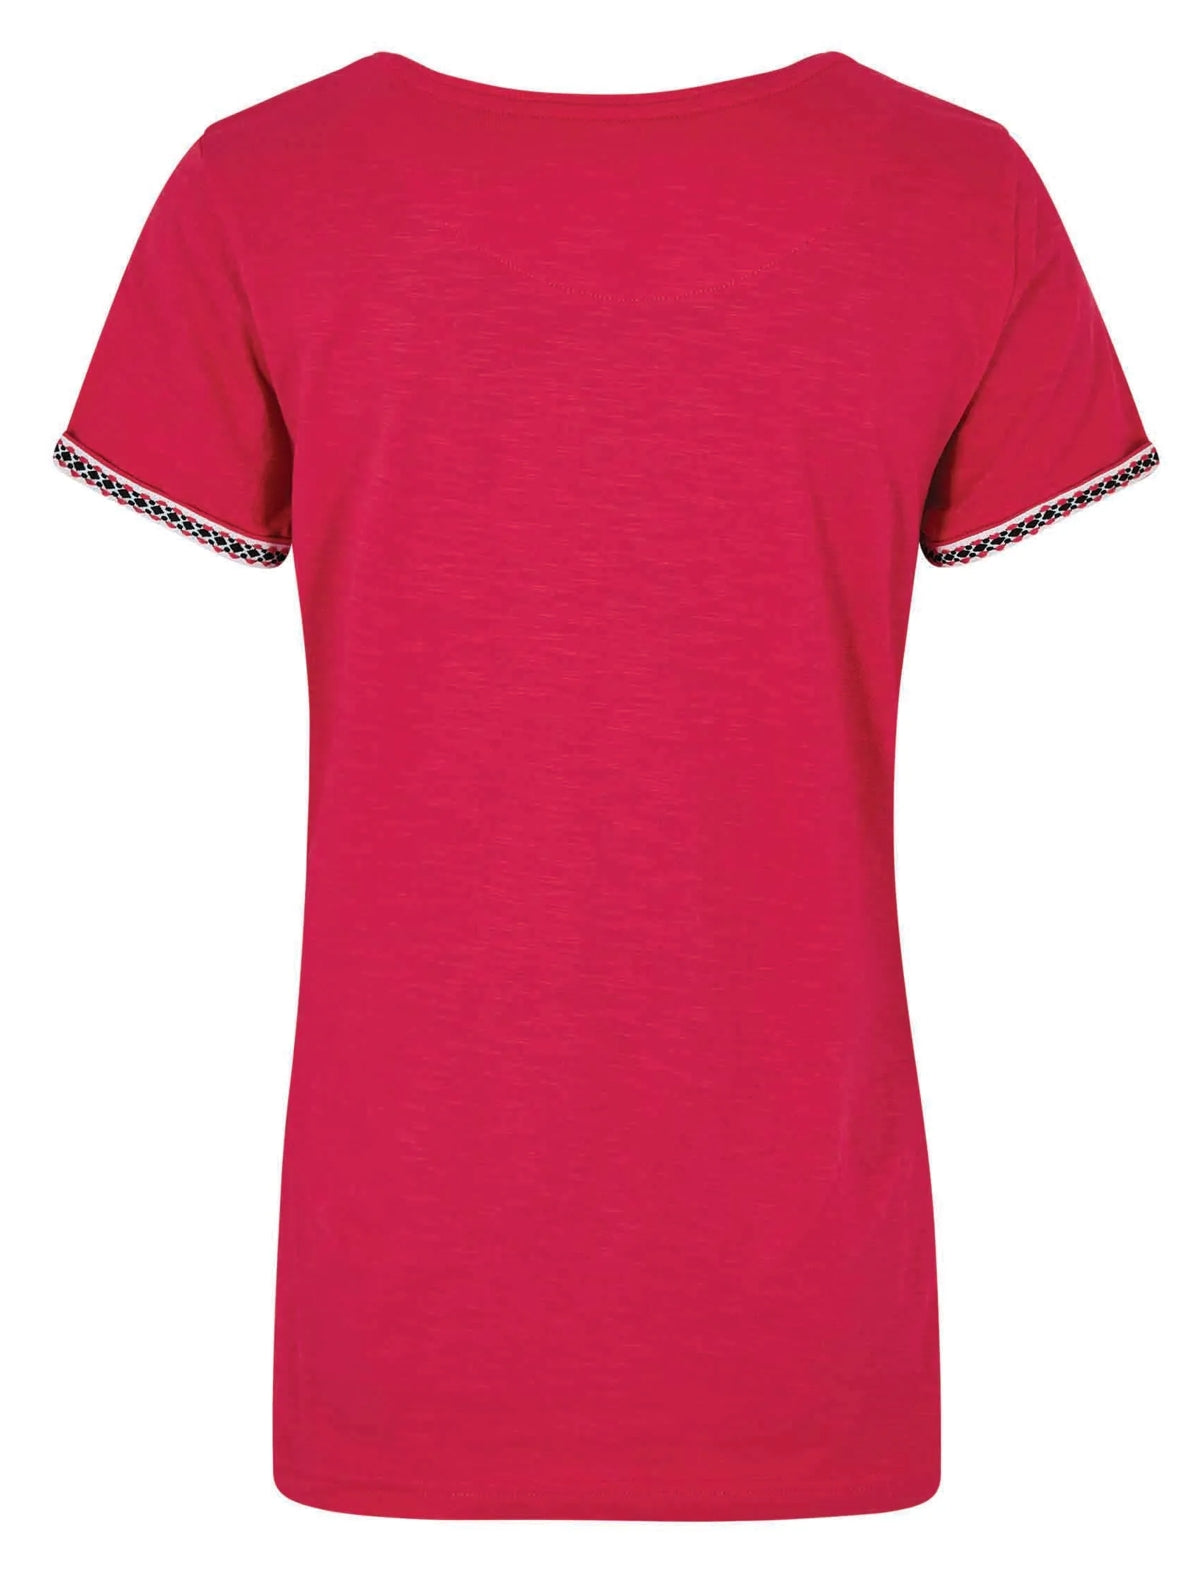 Women's short sleeve crew neck Teya t-shirt from Weird Fish in Hot Pink with embroidered sleeve decoration.